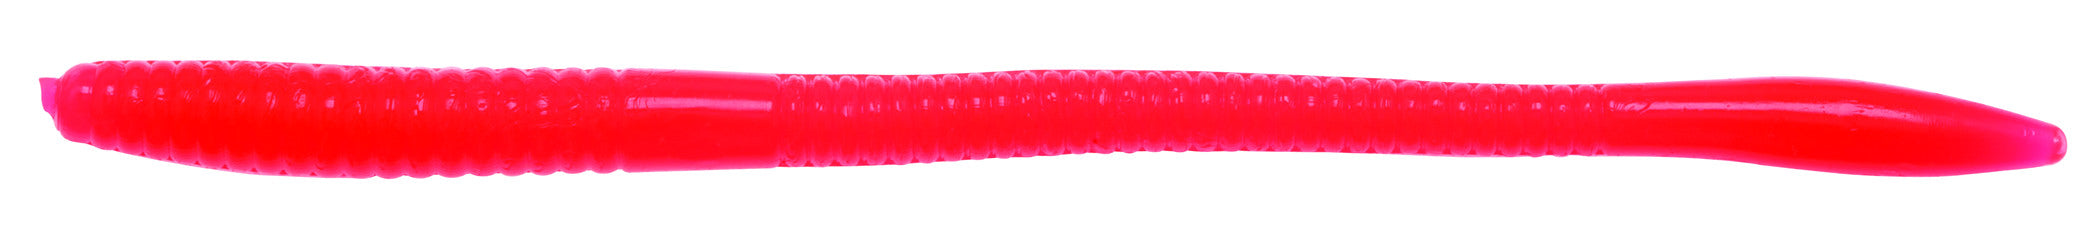 Z-Man Floating WormZ 7 inch Trout Worm Menthiolate